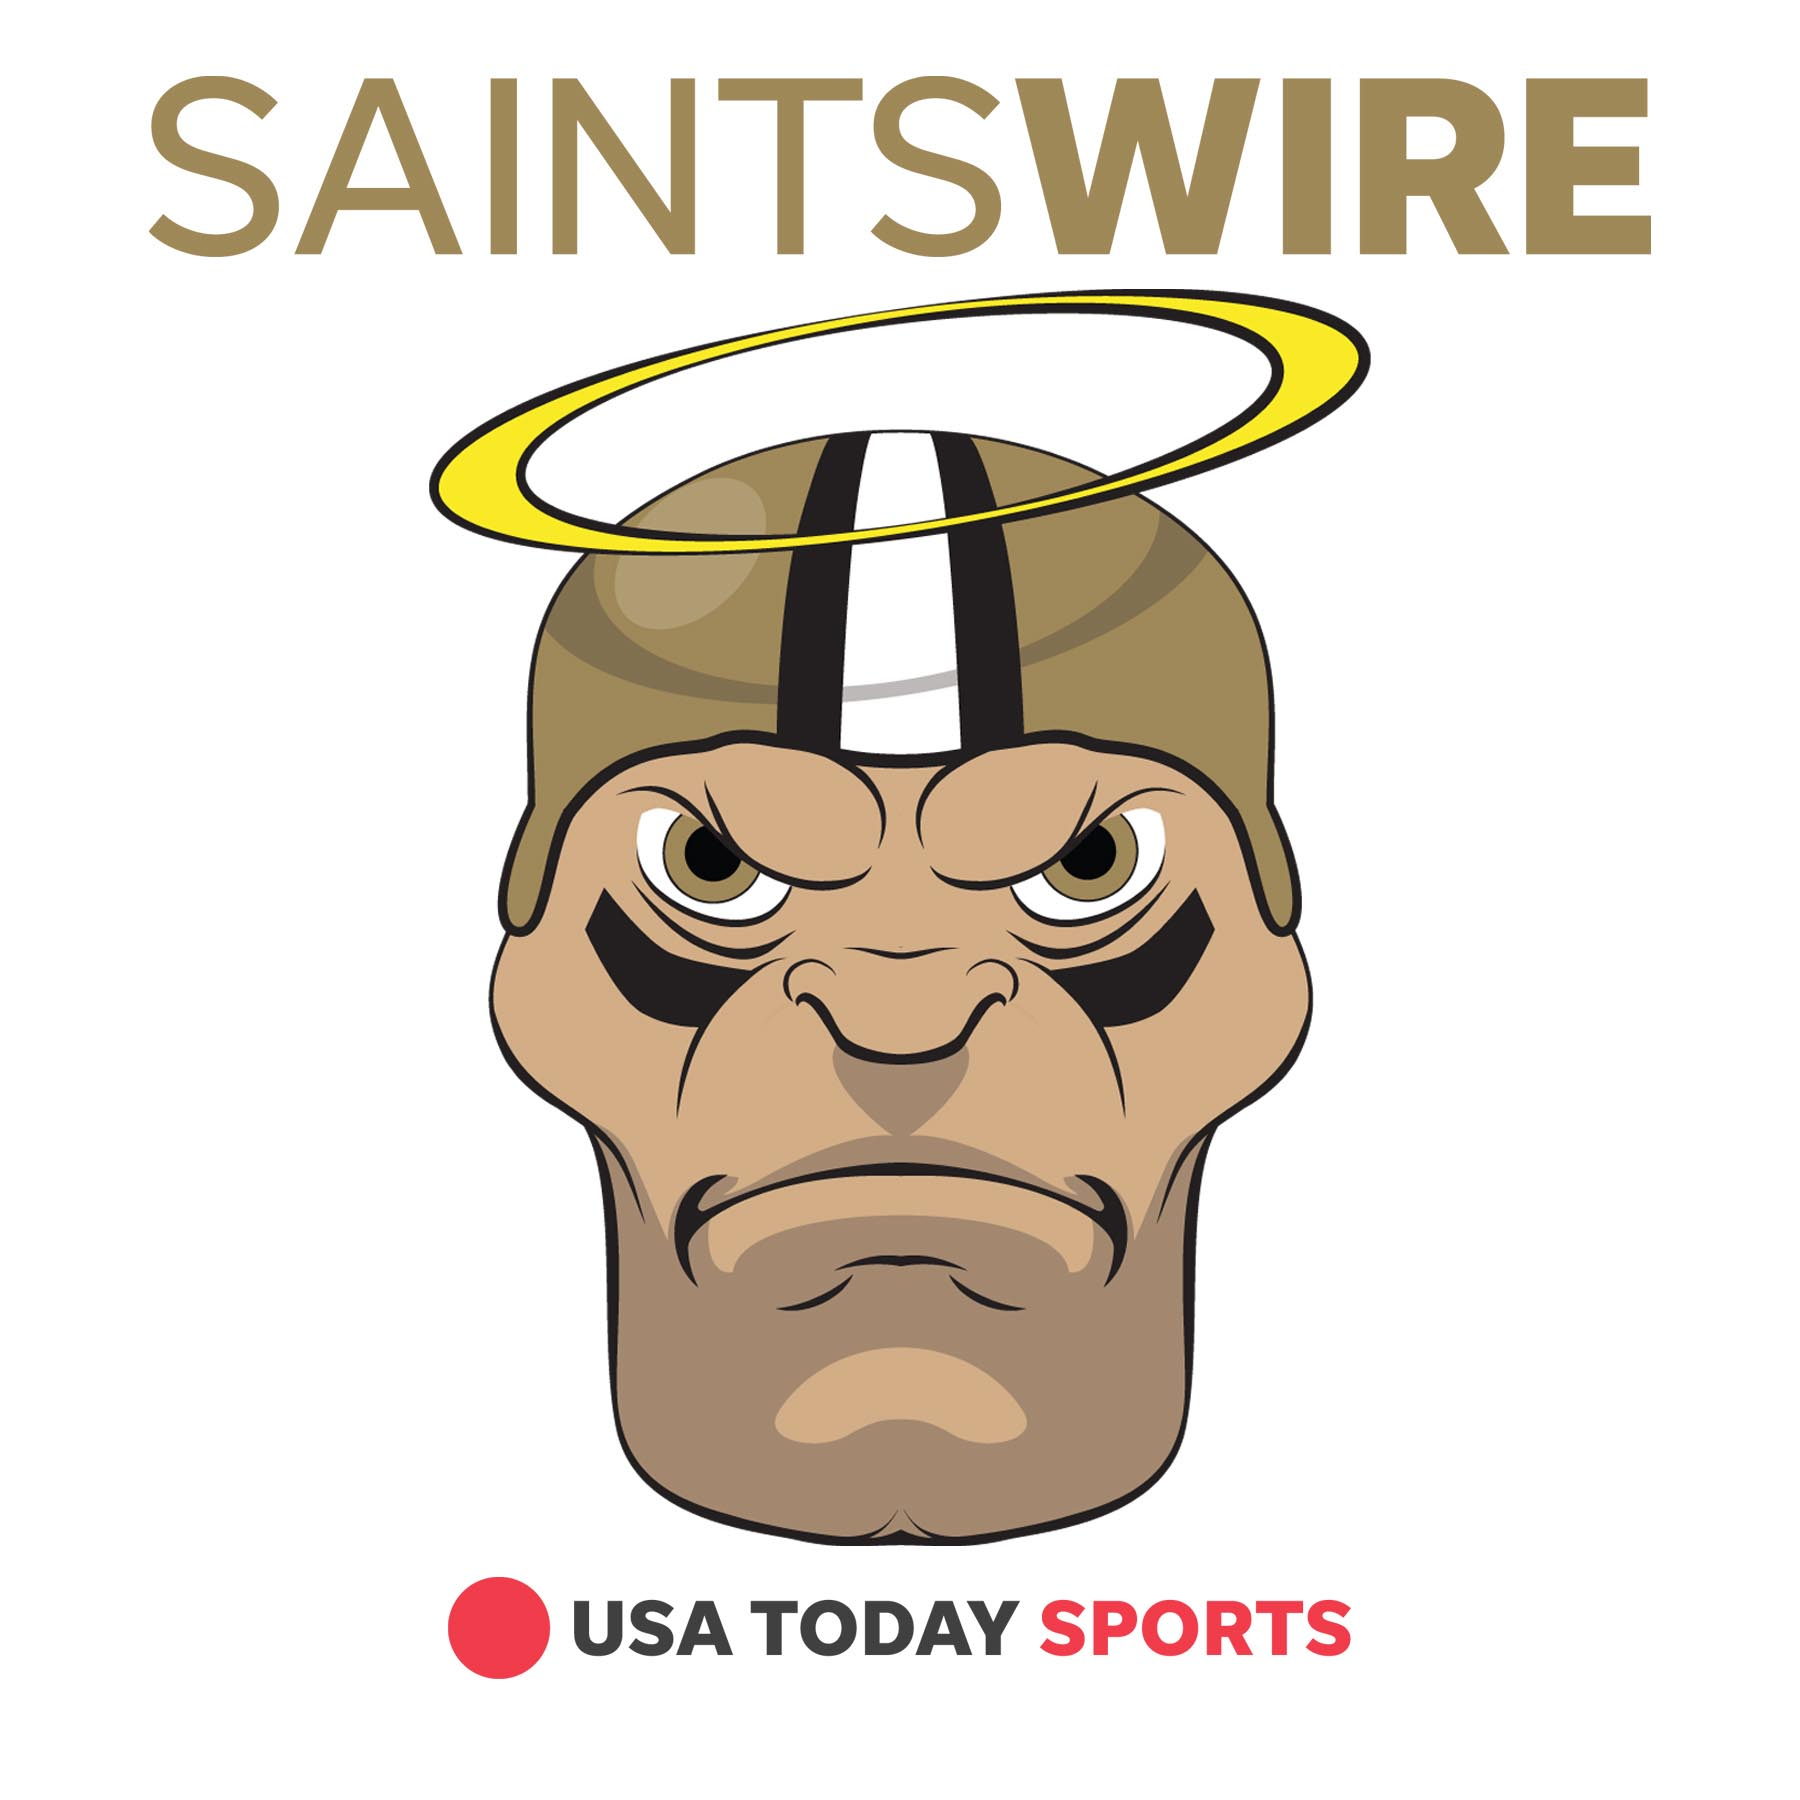 Is it already too late for Saints to salvage their season?